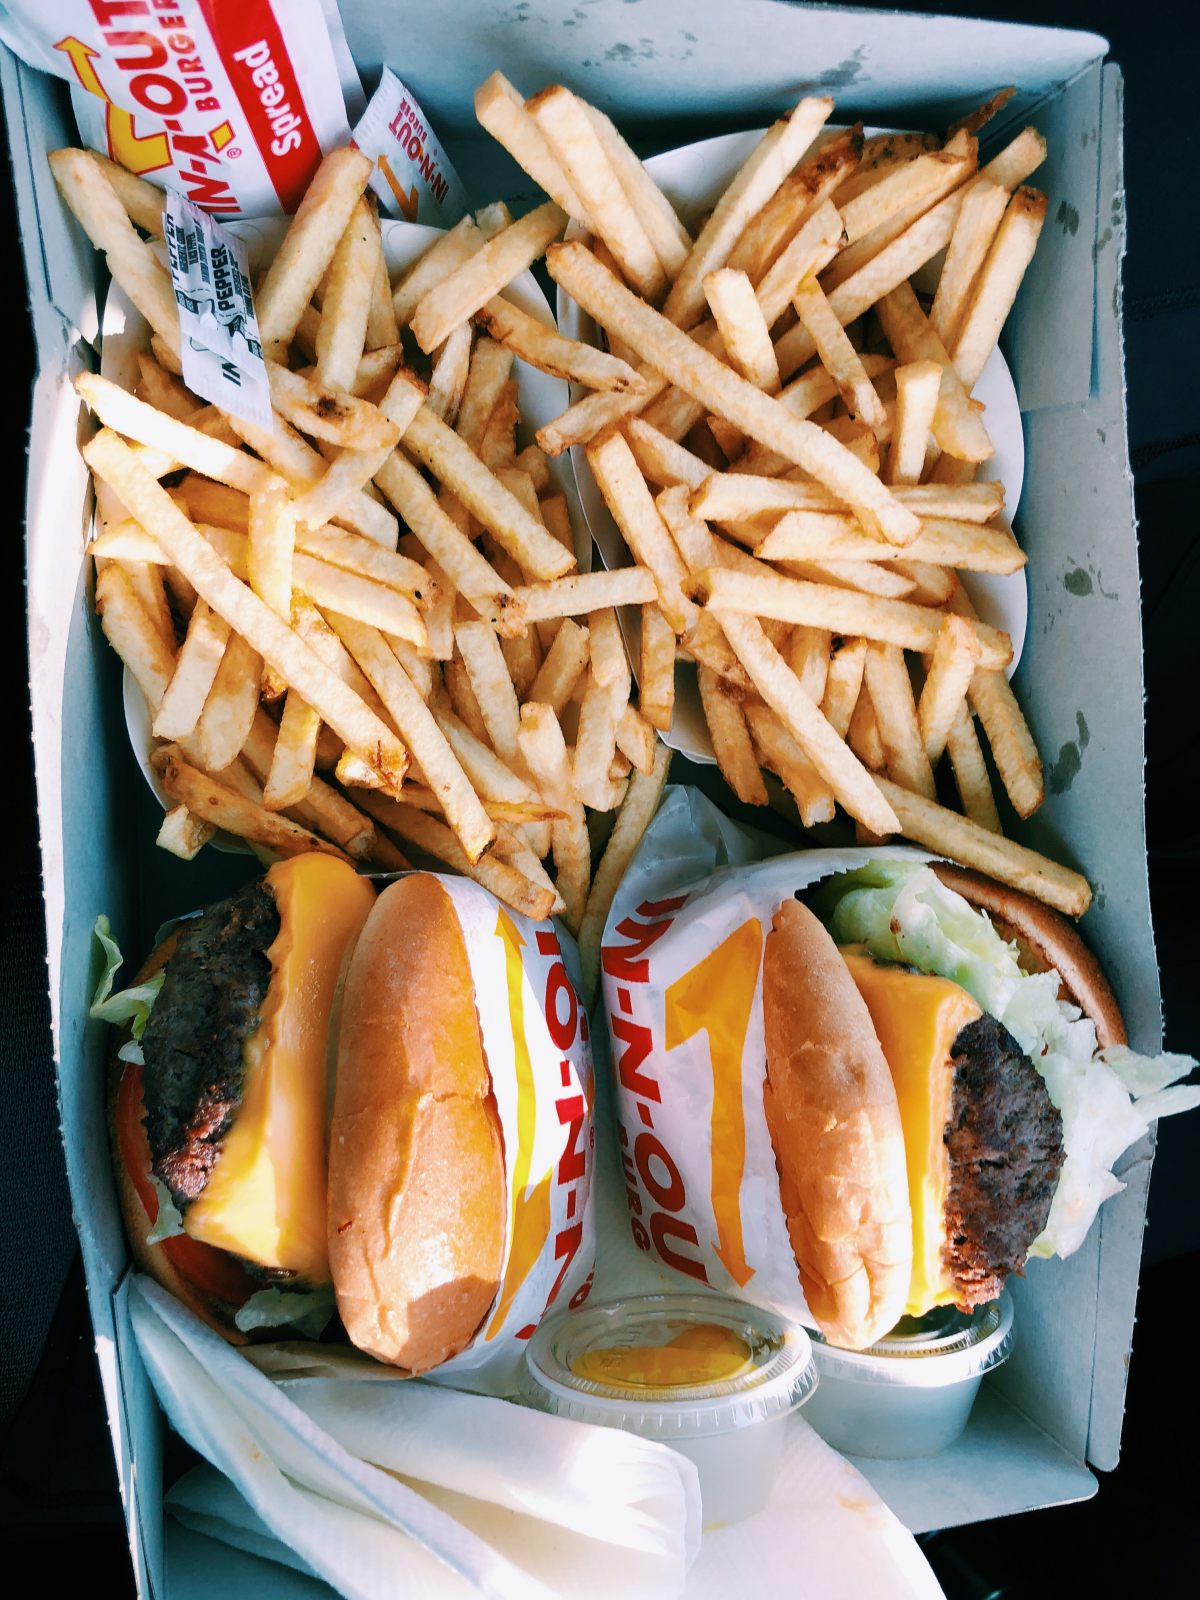 fast food burgers and fries